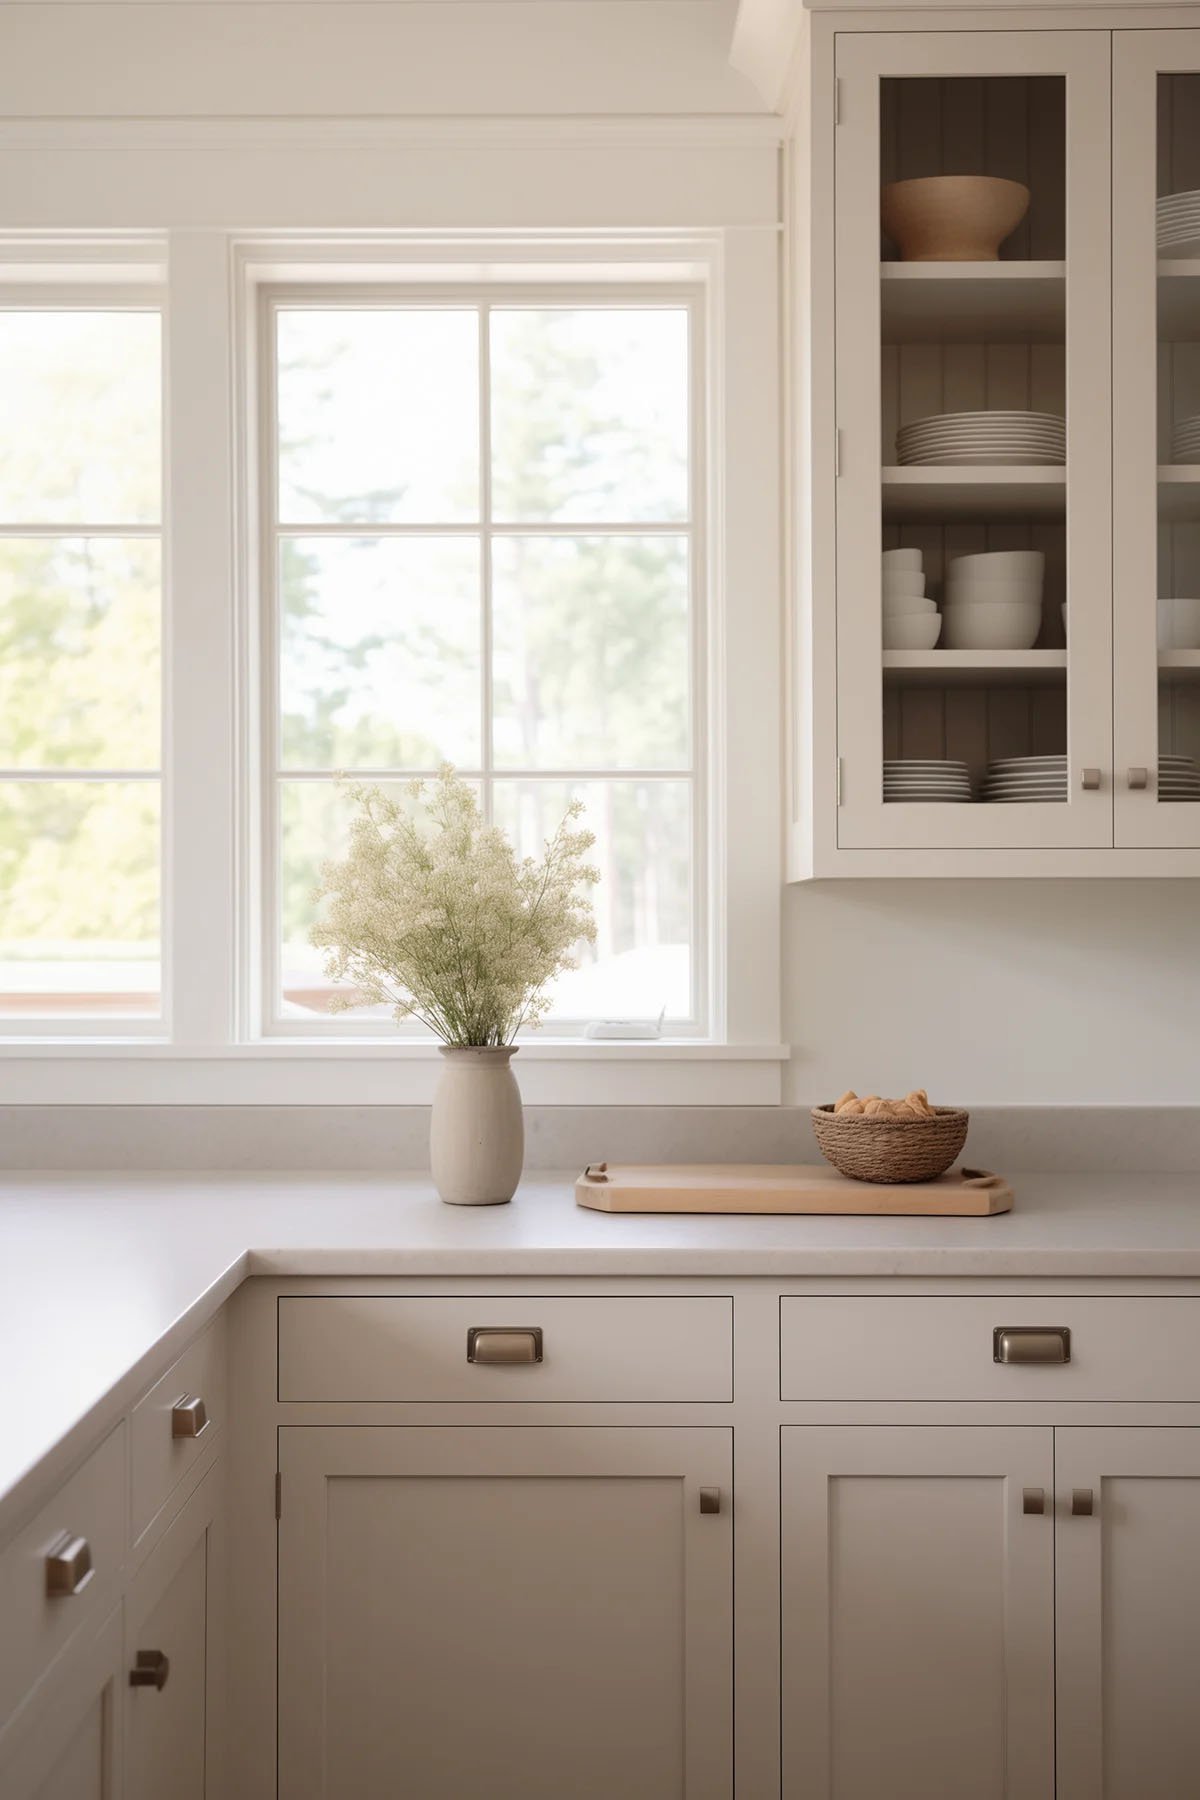 Benjamin Moore Edgecomb Grey cabinets with a warm white wall color and silver hardware. 